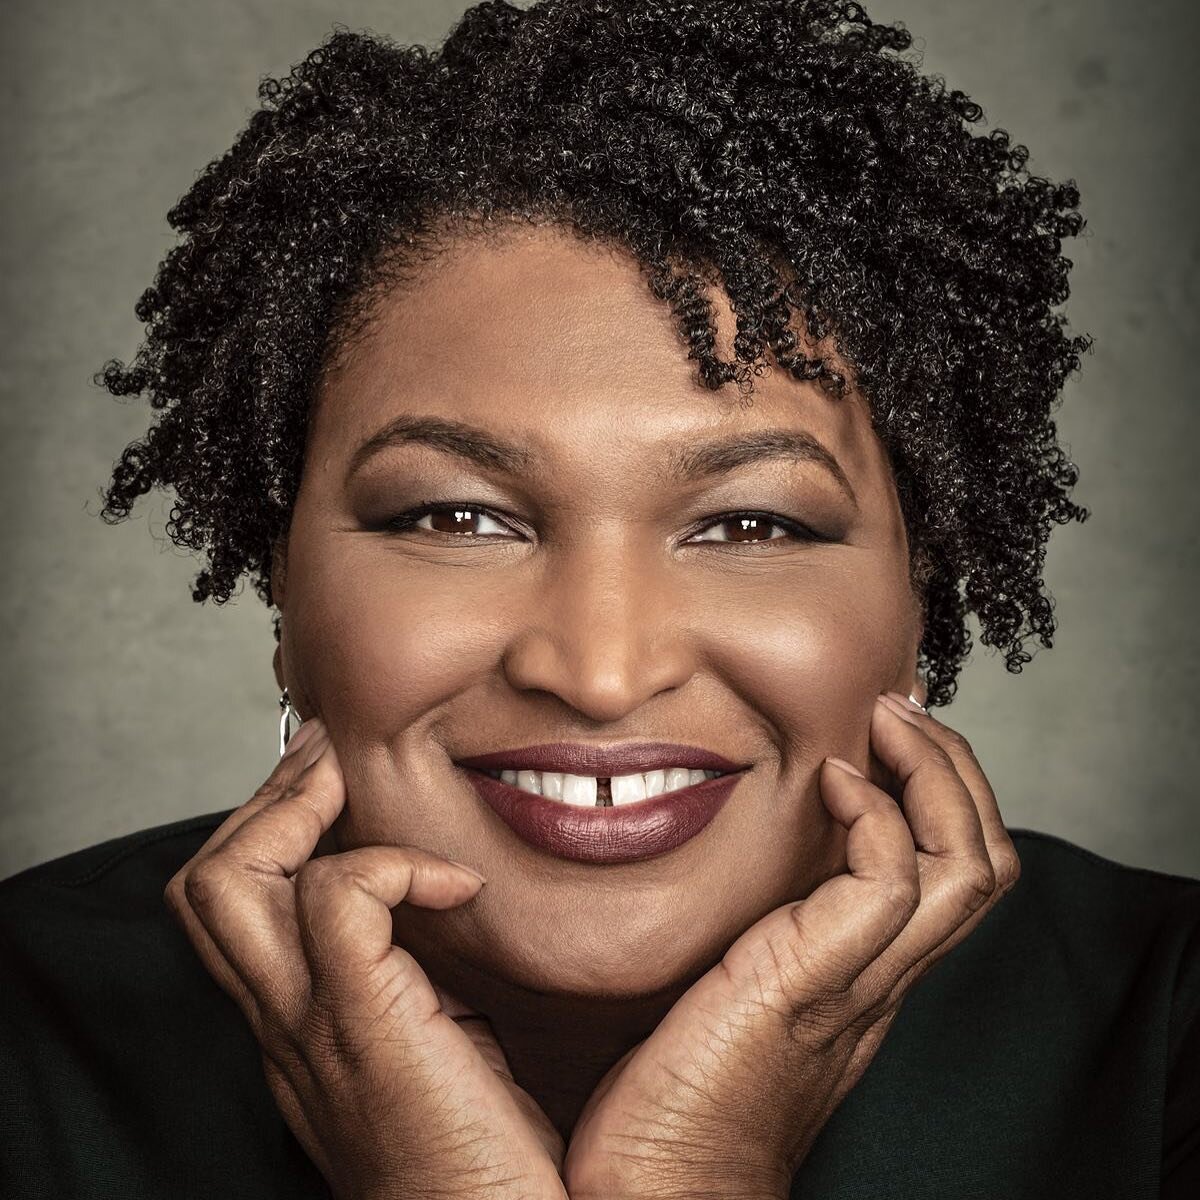 &ldquo;I am not optimistic or pessimistic, I am determined.&rdquo; &mdash;Her Radiant Highness Stacey Abrams 🇫🇷 en hommage &agrave; Jean Monnet (1888-1979)